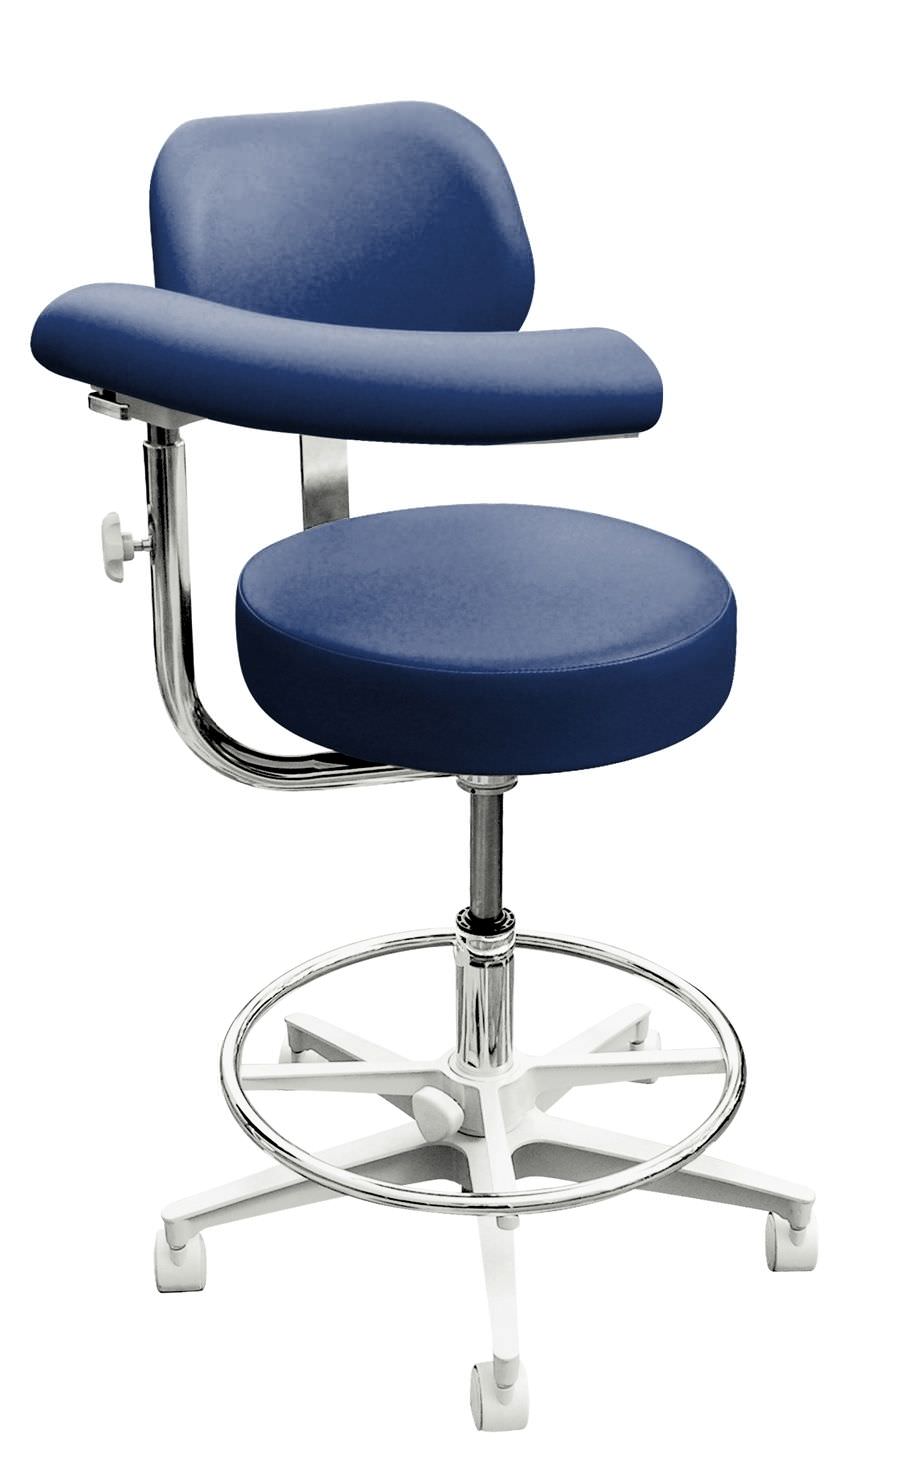 Dental stool / height-adjustable / on casters / with backrest 2000 Brewer Company (The)